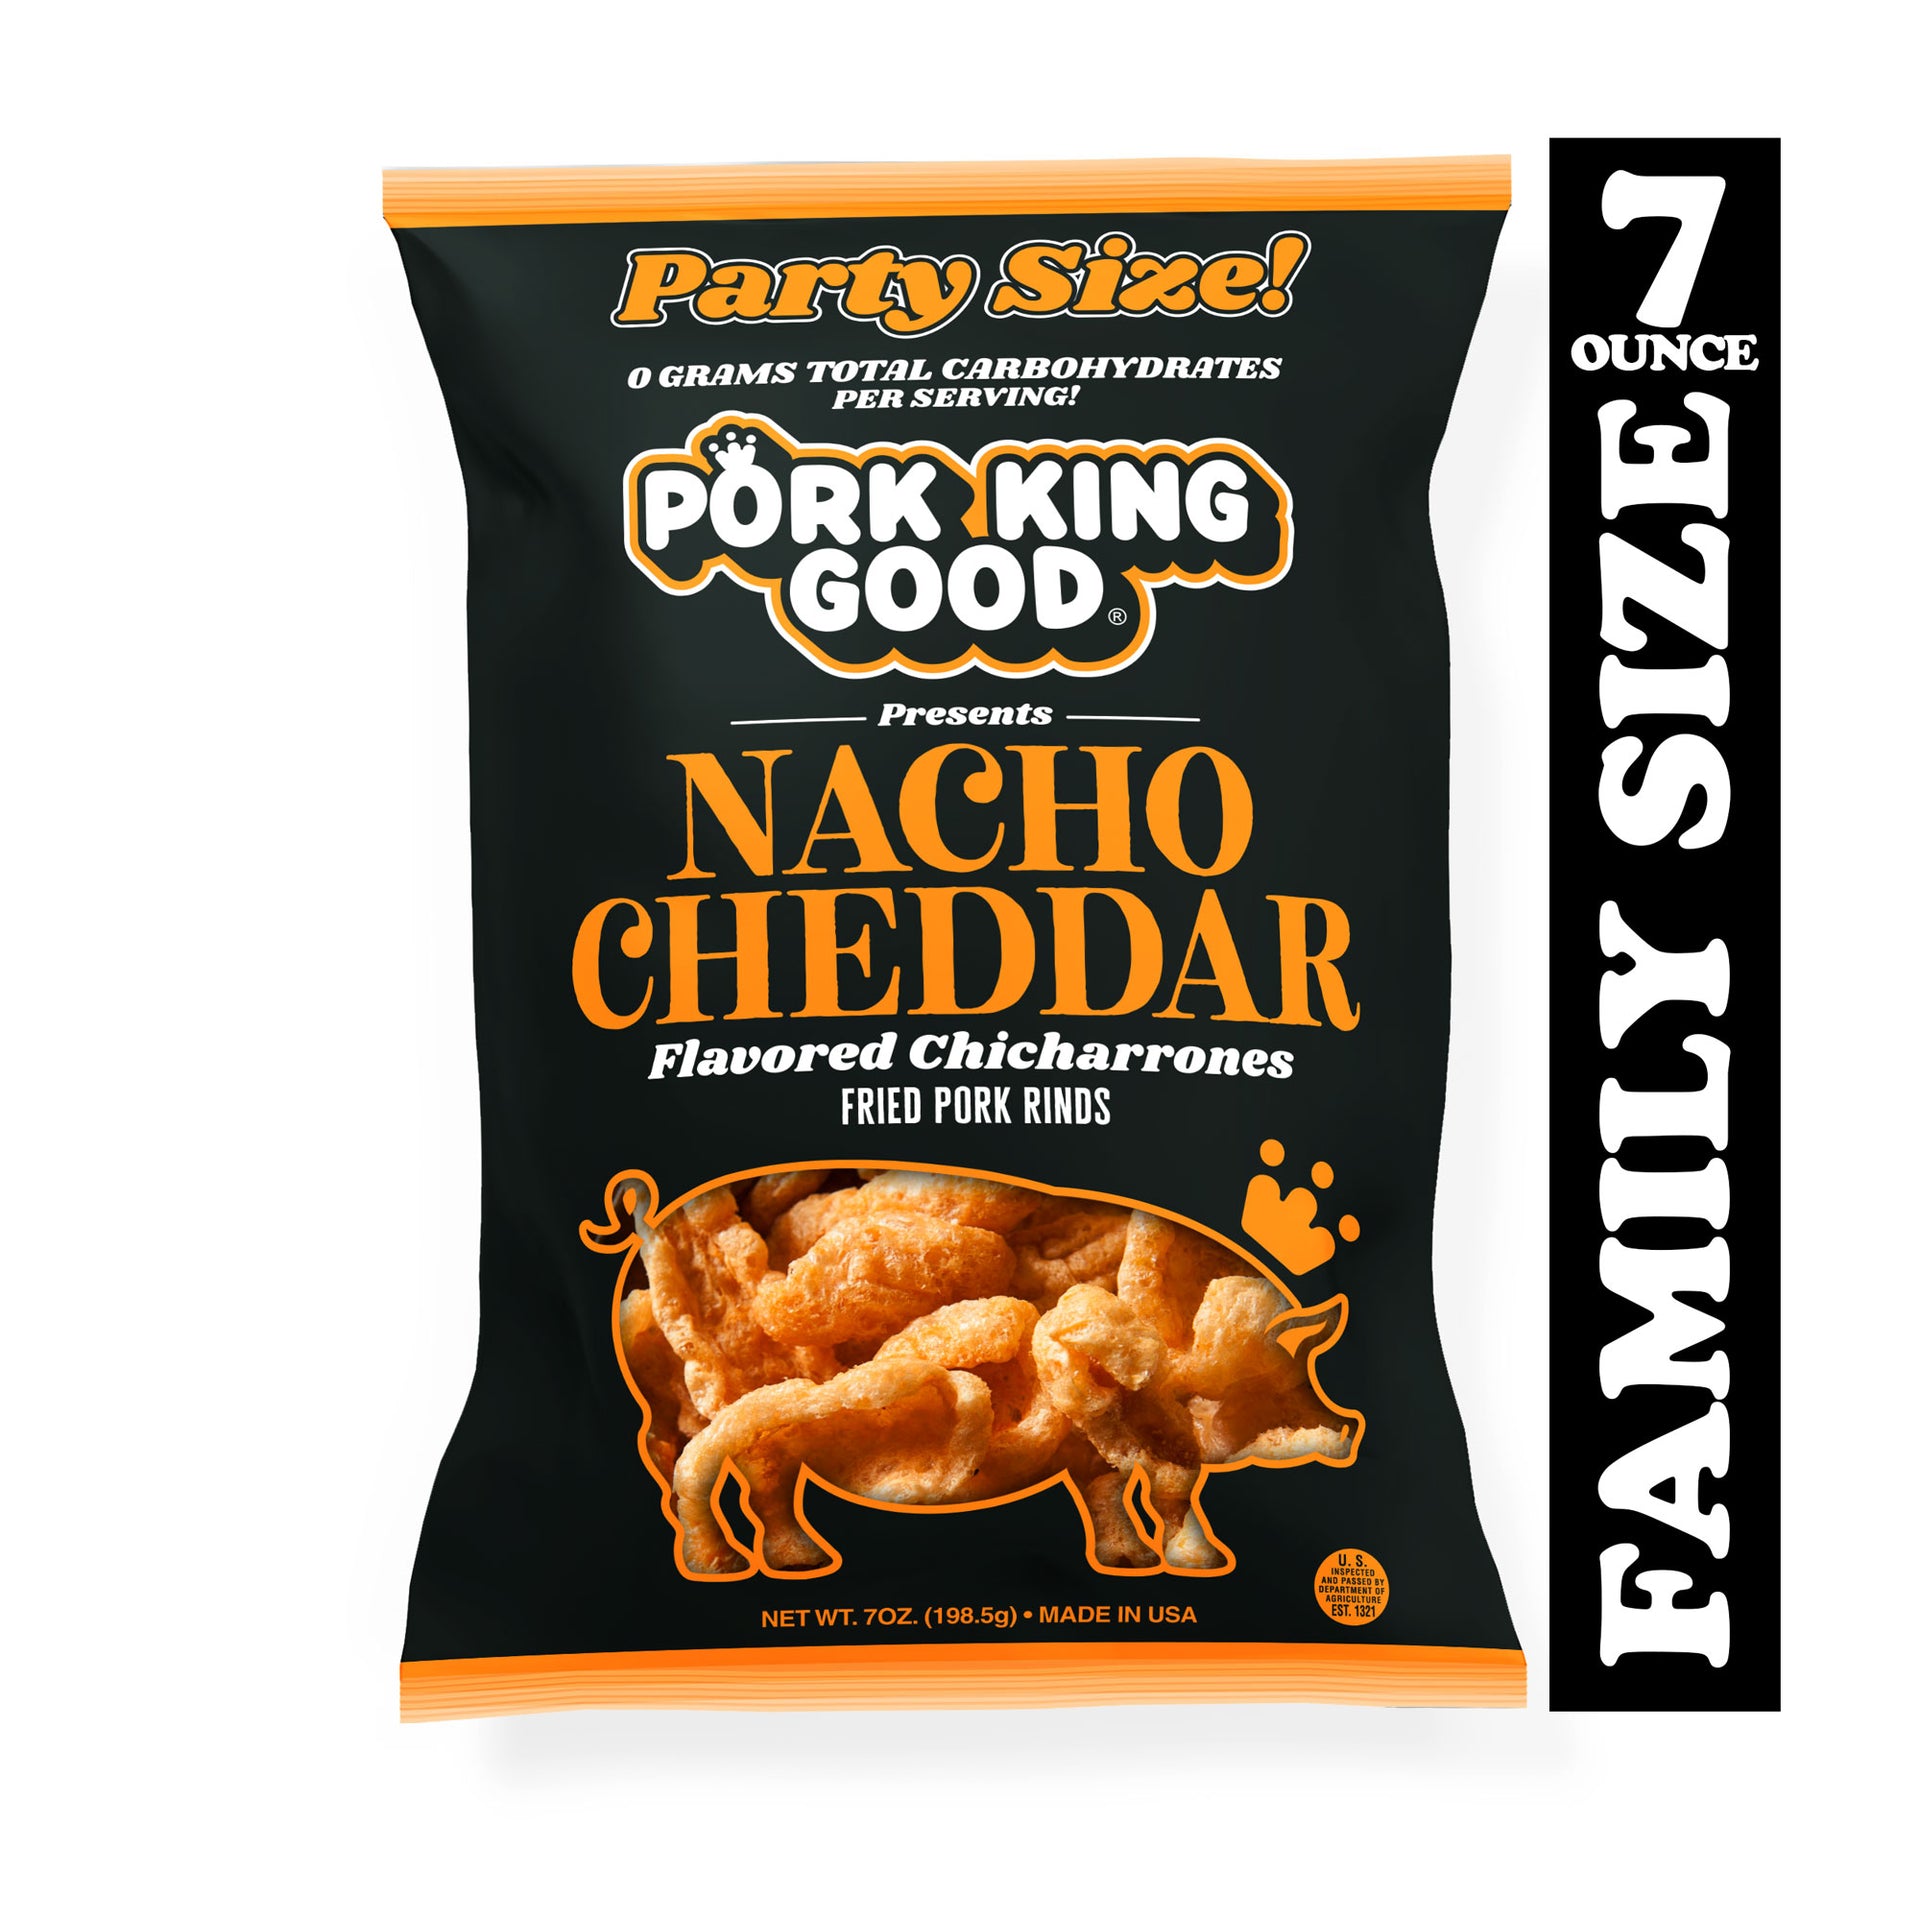  Pork King Good Stupid Hot Pork Rinds - (4 Pack) Low Carb, Keto  Diet Friendly Snack - Extremely Spicy Chicharrones